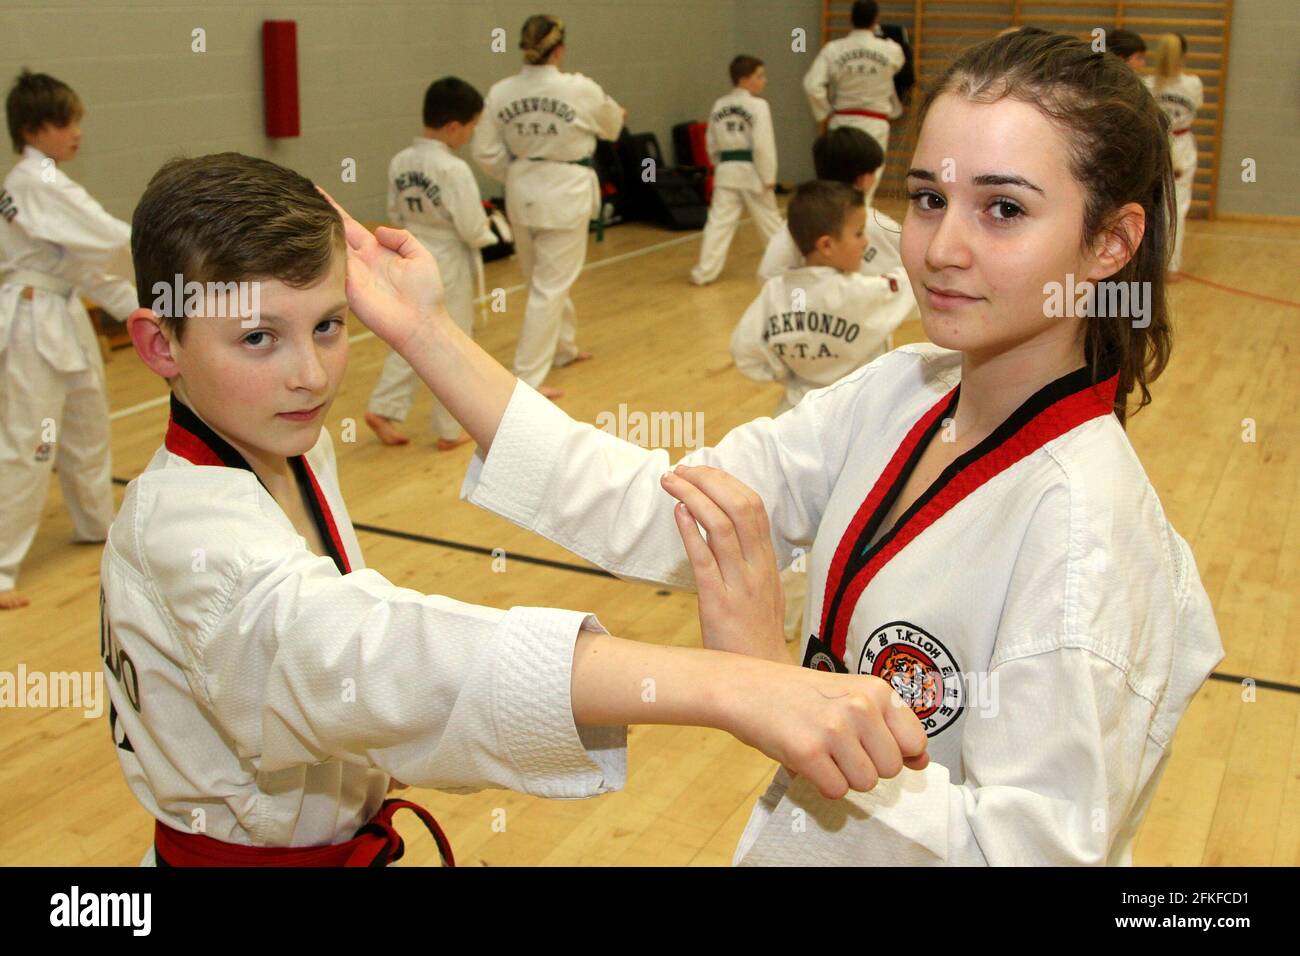 Taekwondo T.T.A at Belmont Academy.Coach / tutor Alan Brown organises  Taekwondo classes at Dalrymple, Drongon, & Belmont Academy with all ages  and families involved. Ross Duncan (12) with Nikki Kefala (14) who